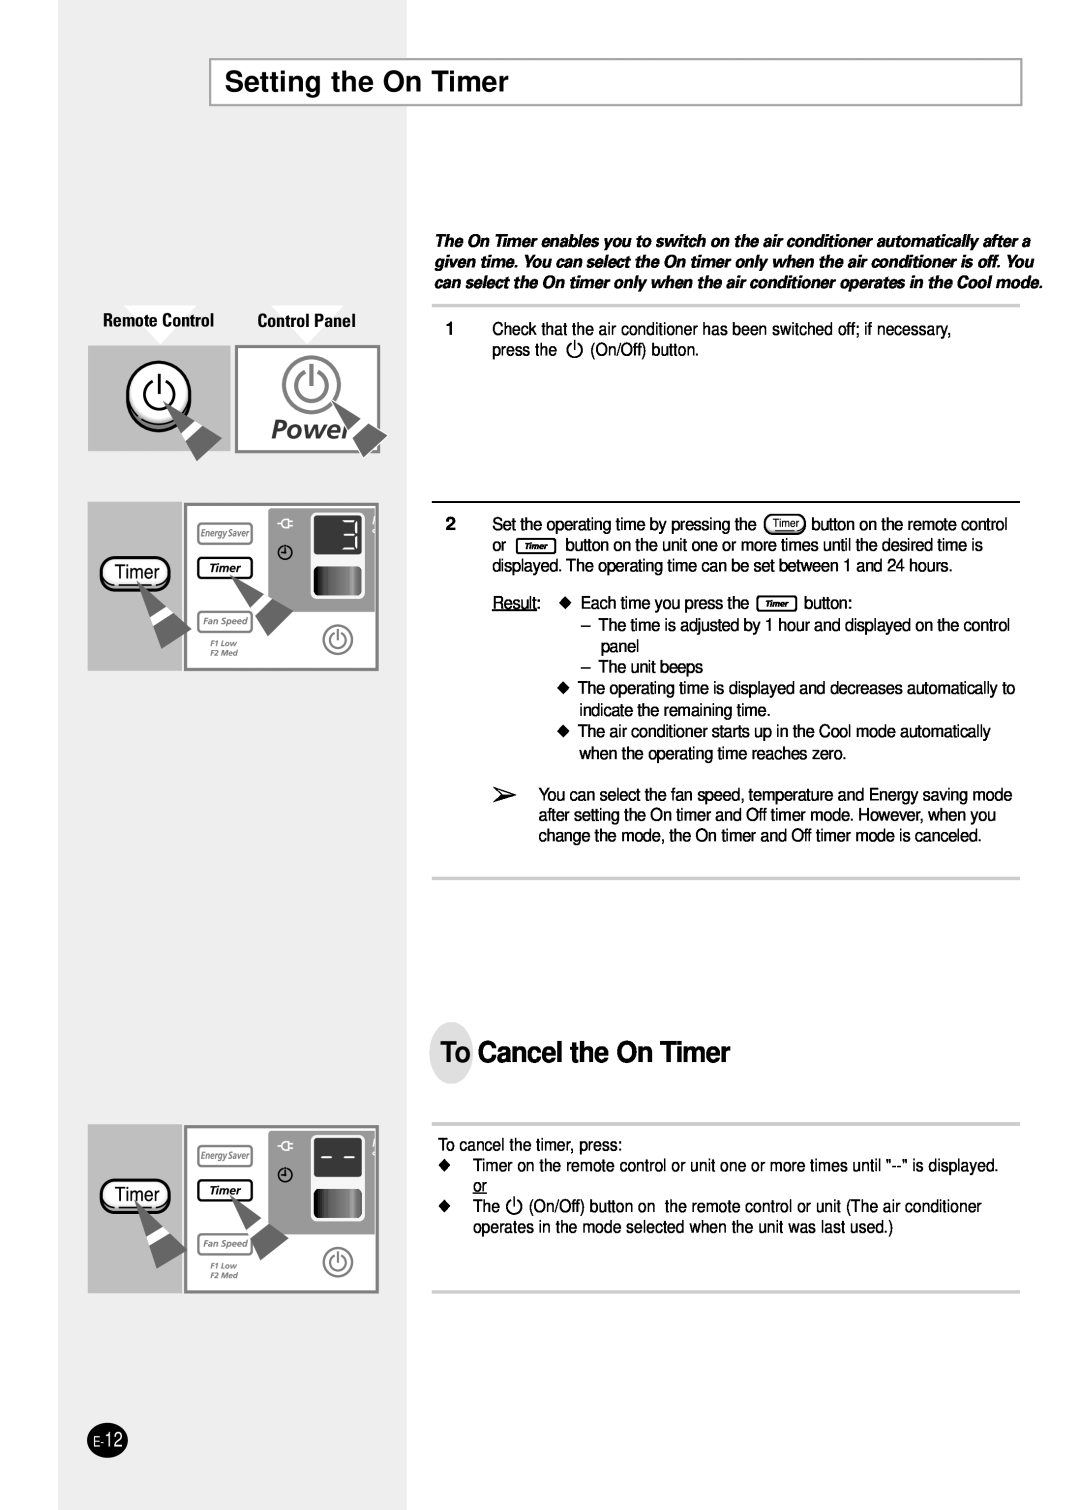 Samsung AW0601B manual Setting the On Timer, To Cancel the On Timer, Remote Control, Control Panel 